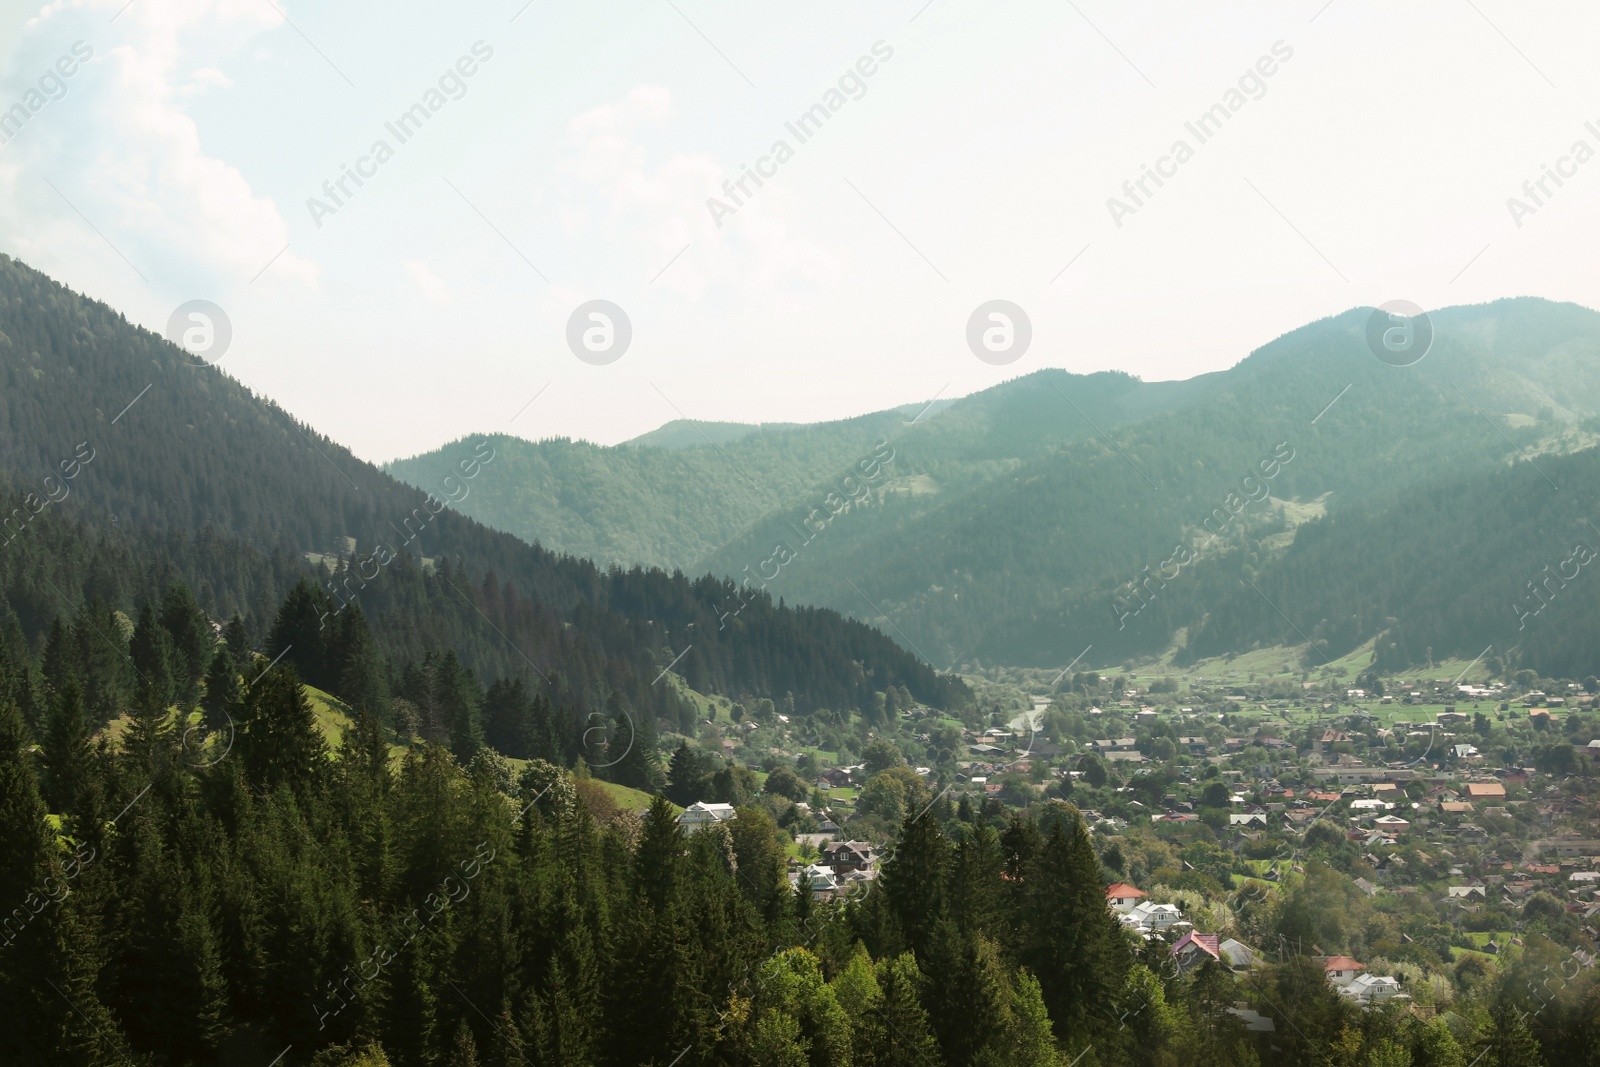 Photo of Picturesque landscape with forest and village in mountains